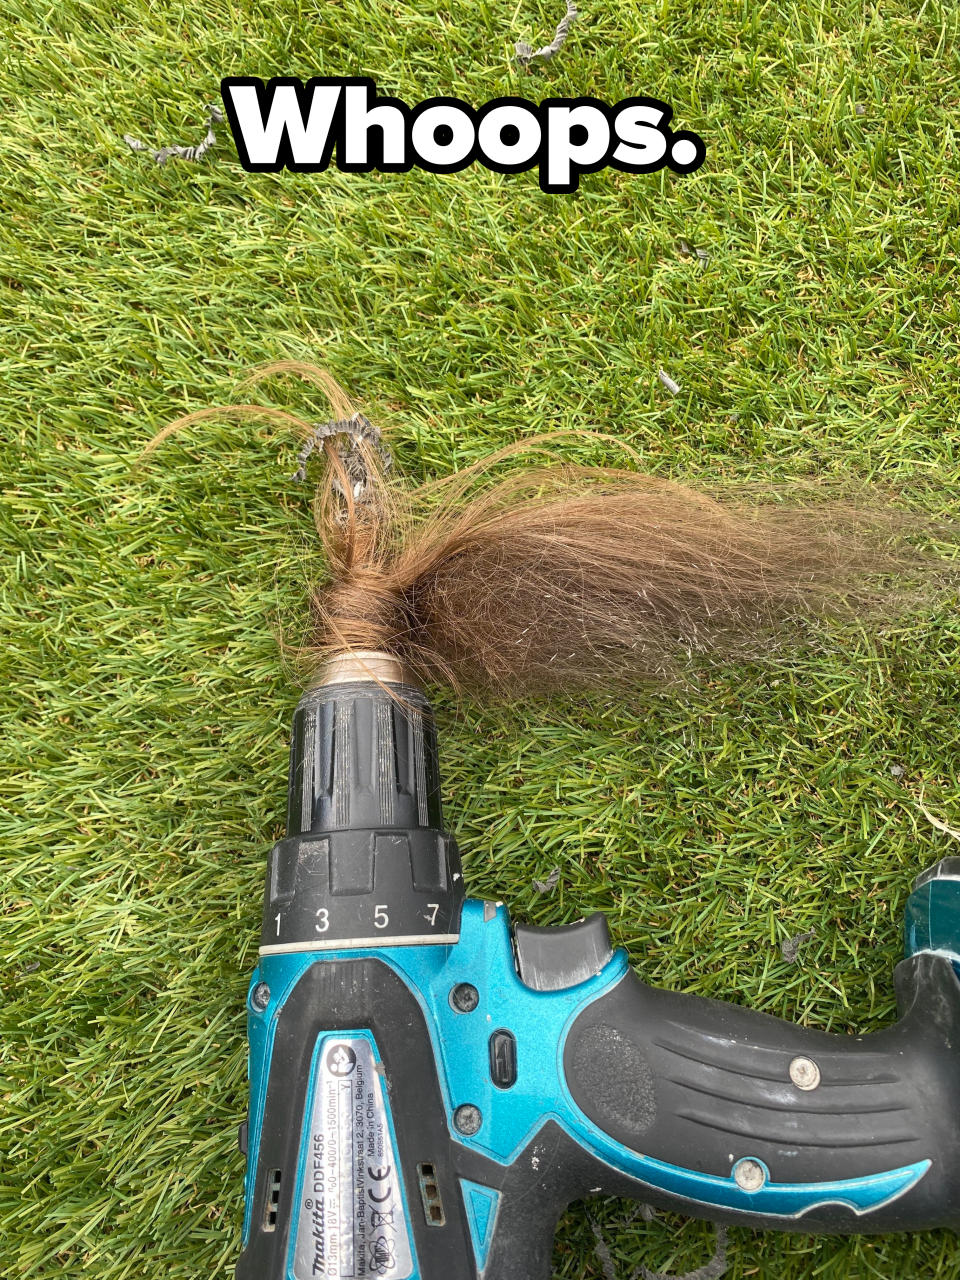 Hair tangled in a power drill lying on grass